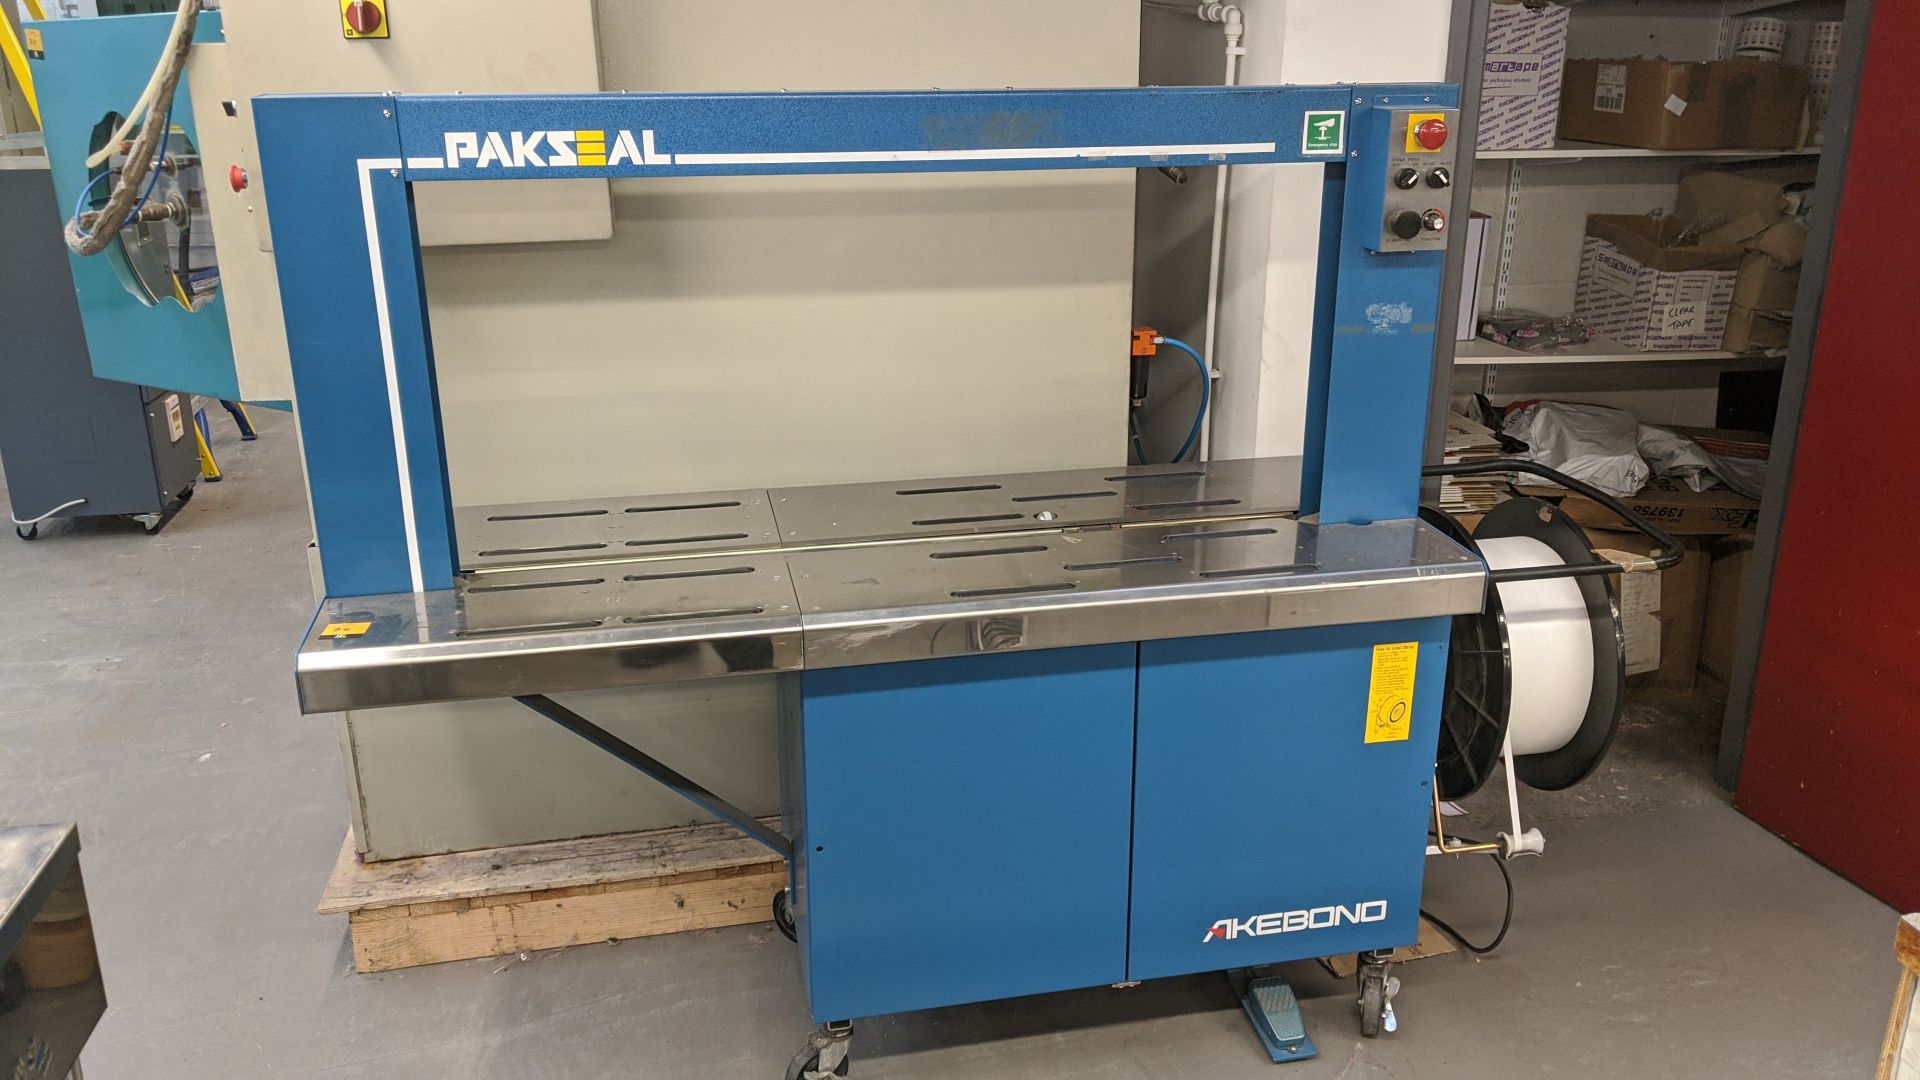 Pakseal Akebond large mobile automatic electric strapping/banding machine, model SX510, machine